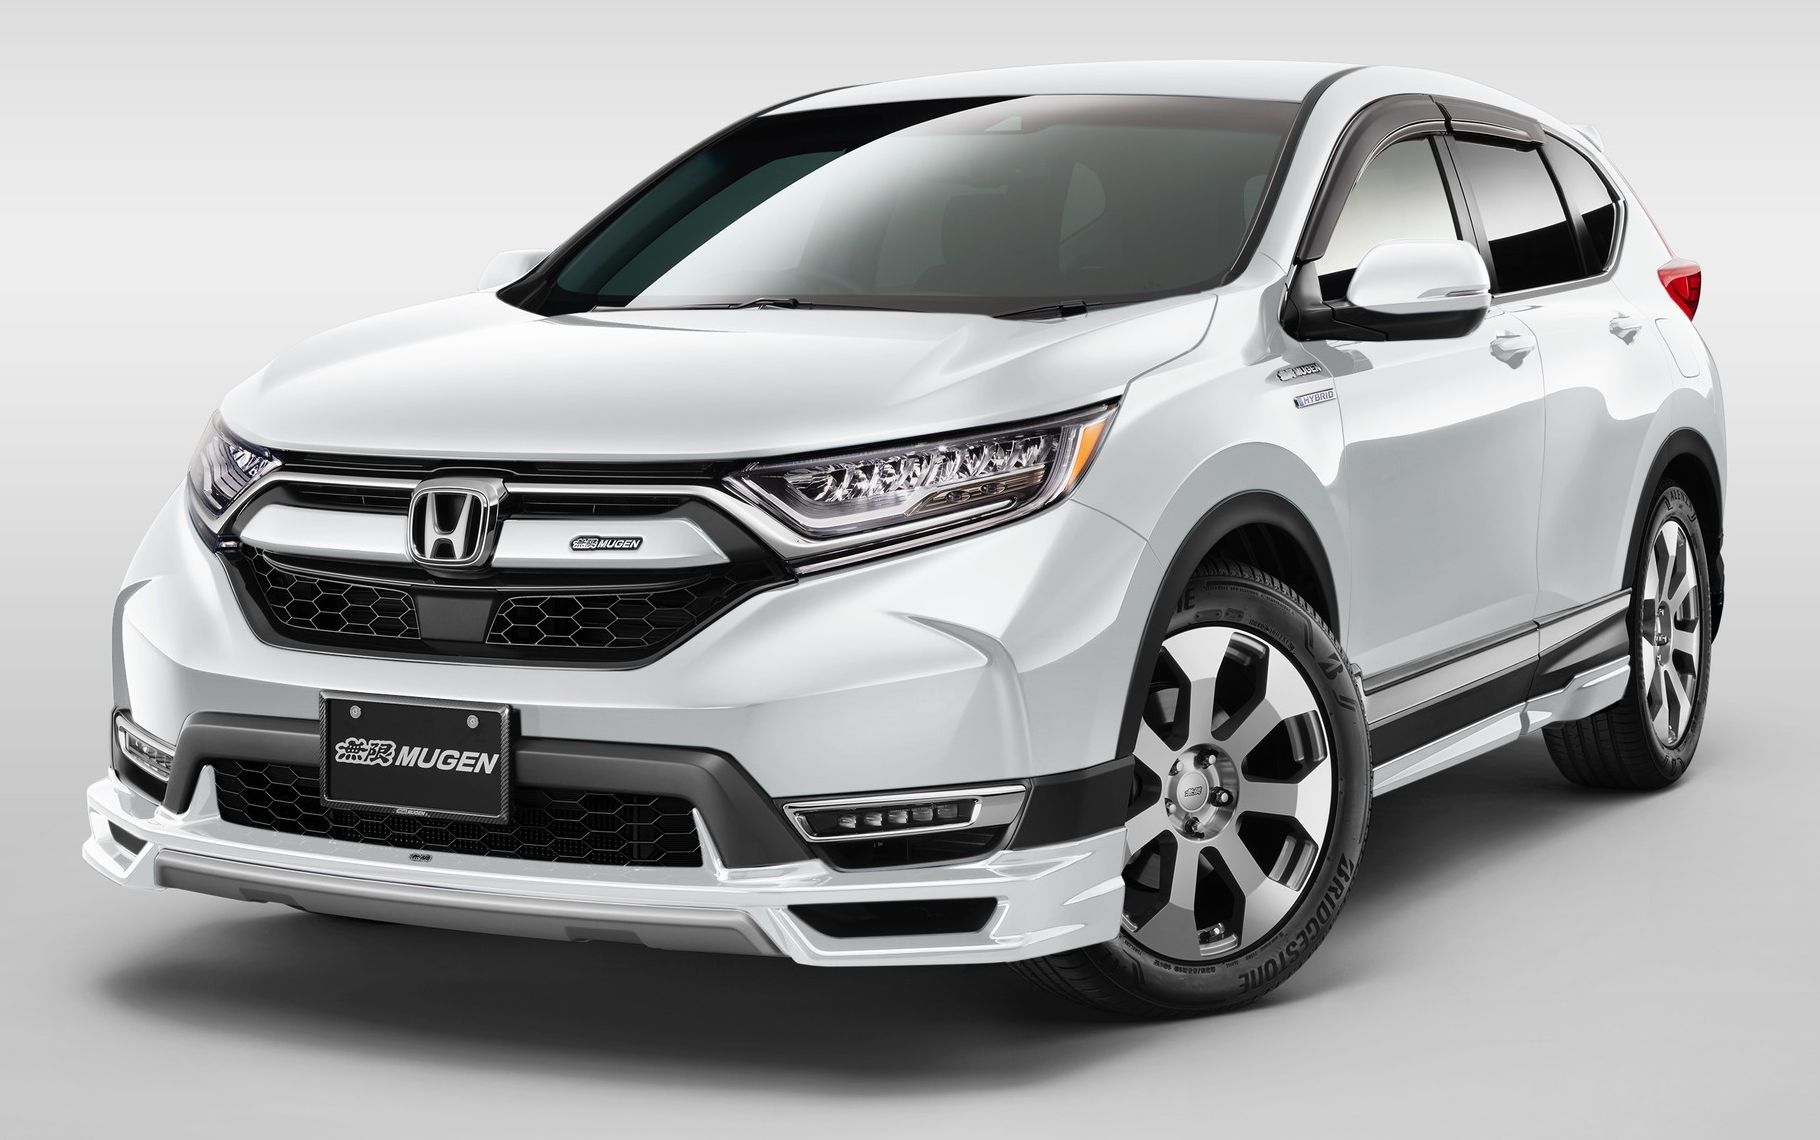 Mugen to showcase accessories for Honda CR-V, Insight and ...